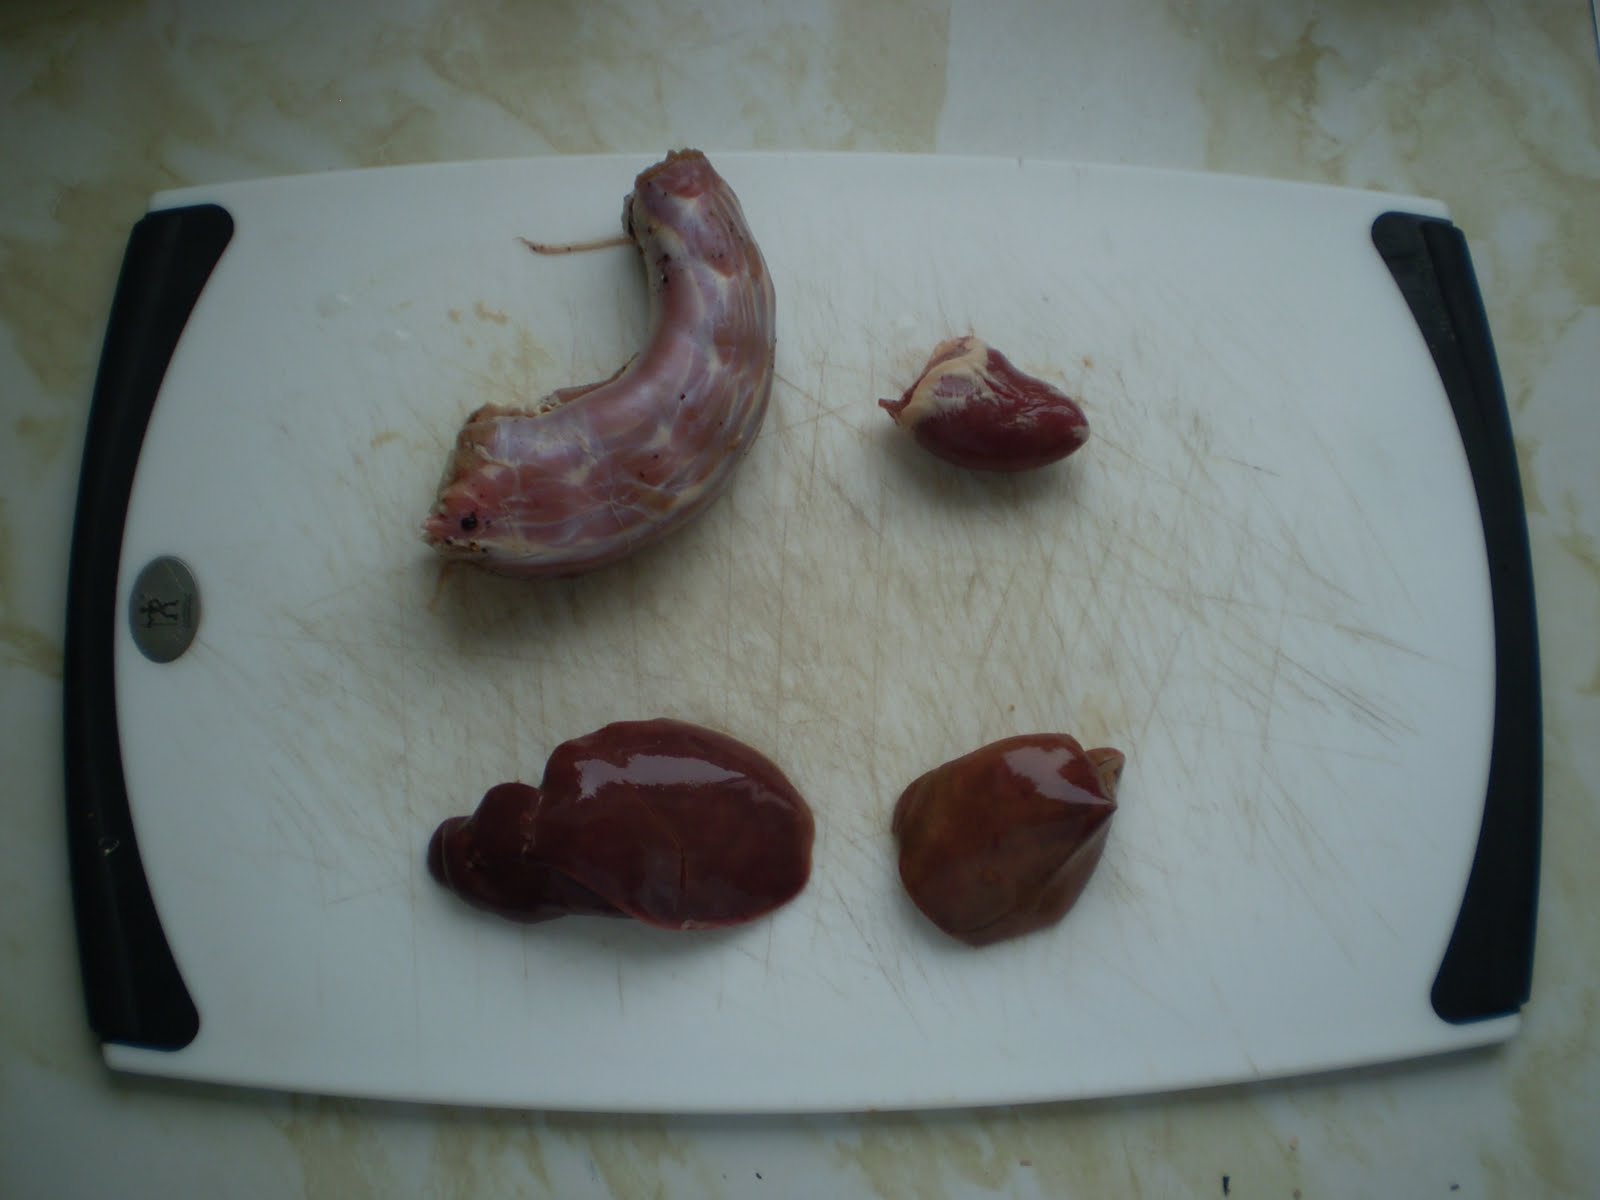 Turkey neck, heart, and liver